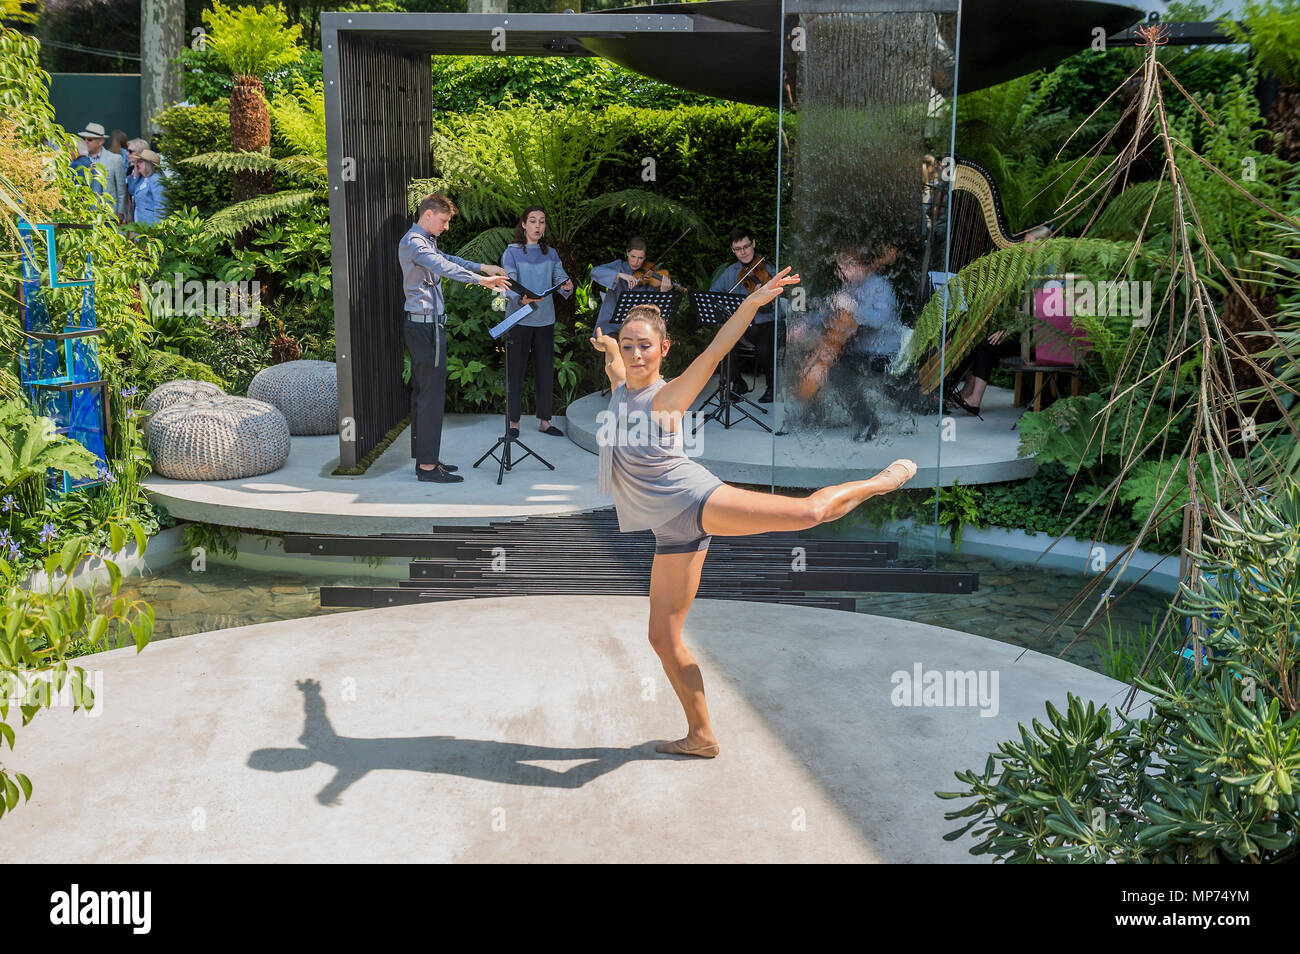 London, UK. 21st May 2018. Constella Opera Ballet perform a unique piece within the VTB Capital Spirit of Cornwall Garden, designed by Stuart Charles Towner and inspired by the work of sculptor Barbara Hepworth with music by composer Leo Geyer - Press day at The RHS Chelsea Flower Show at the Royal Hospital, Chelsea. Credit: Guy Bell/Alamy Live News Stock Photo